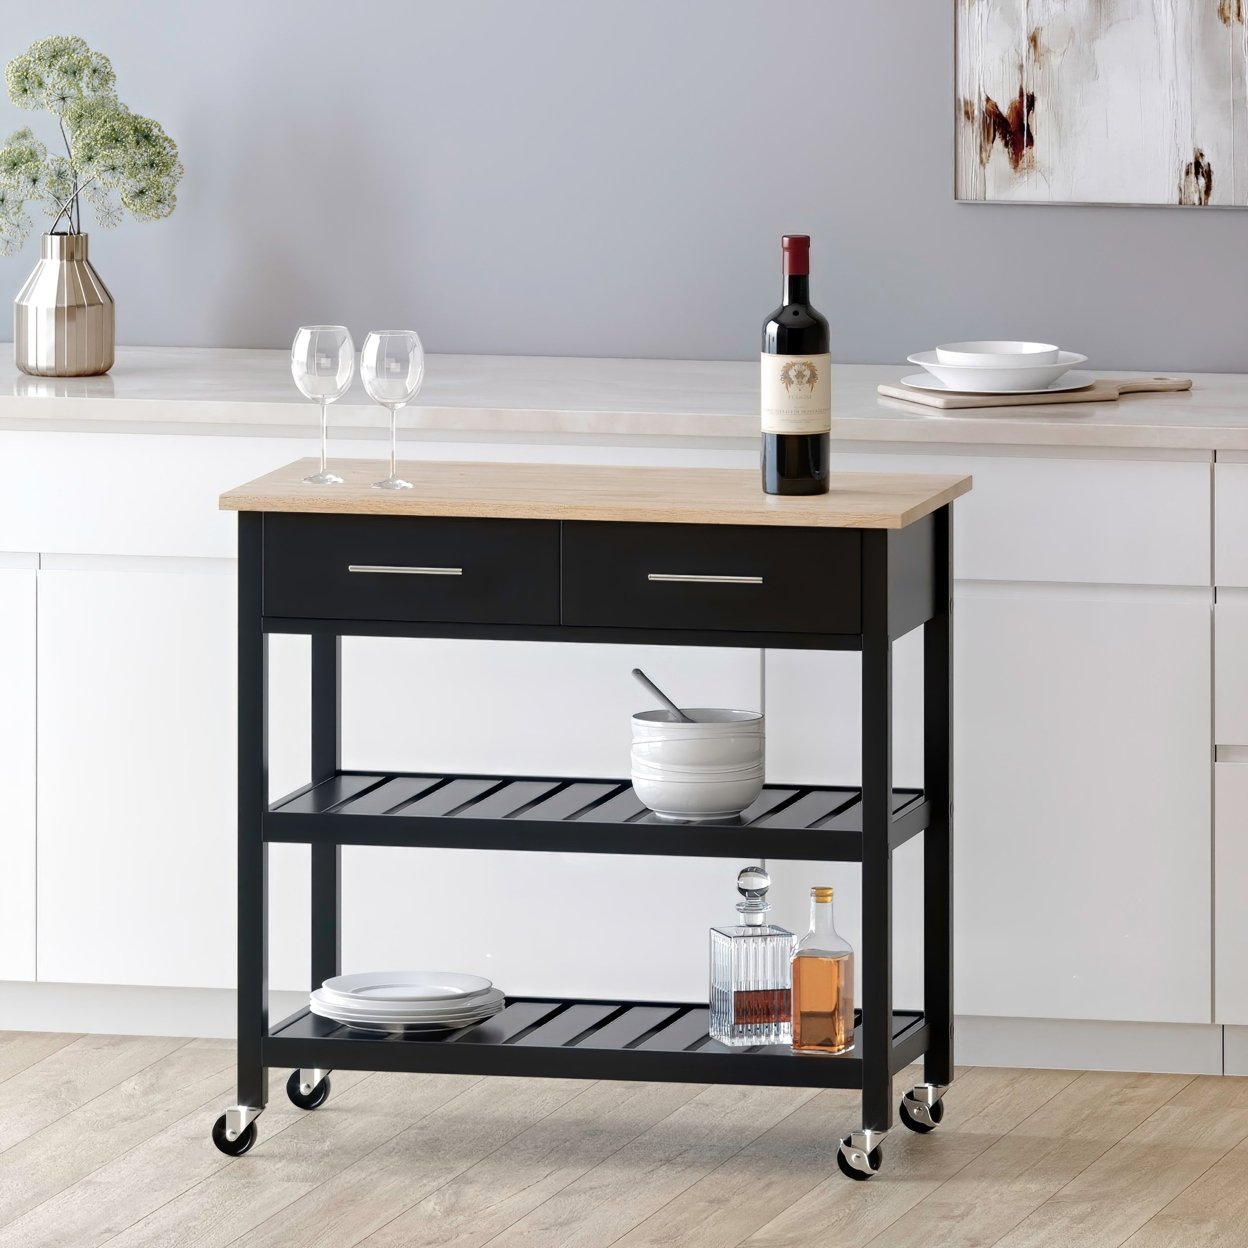 Enon Contemporary Kitchen Cart With Wheels - White/natural